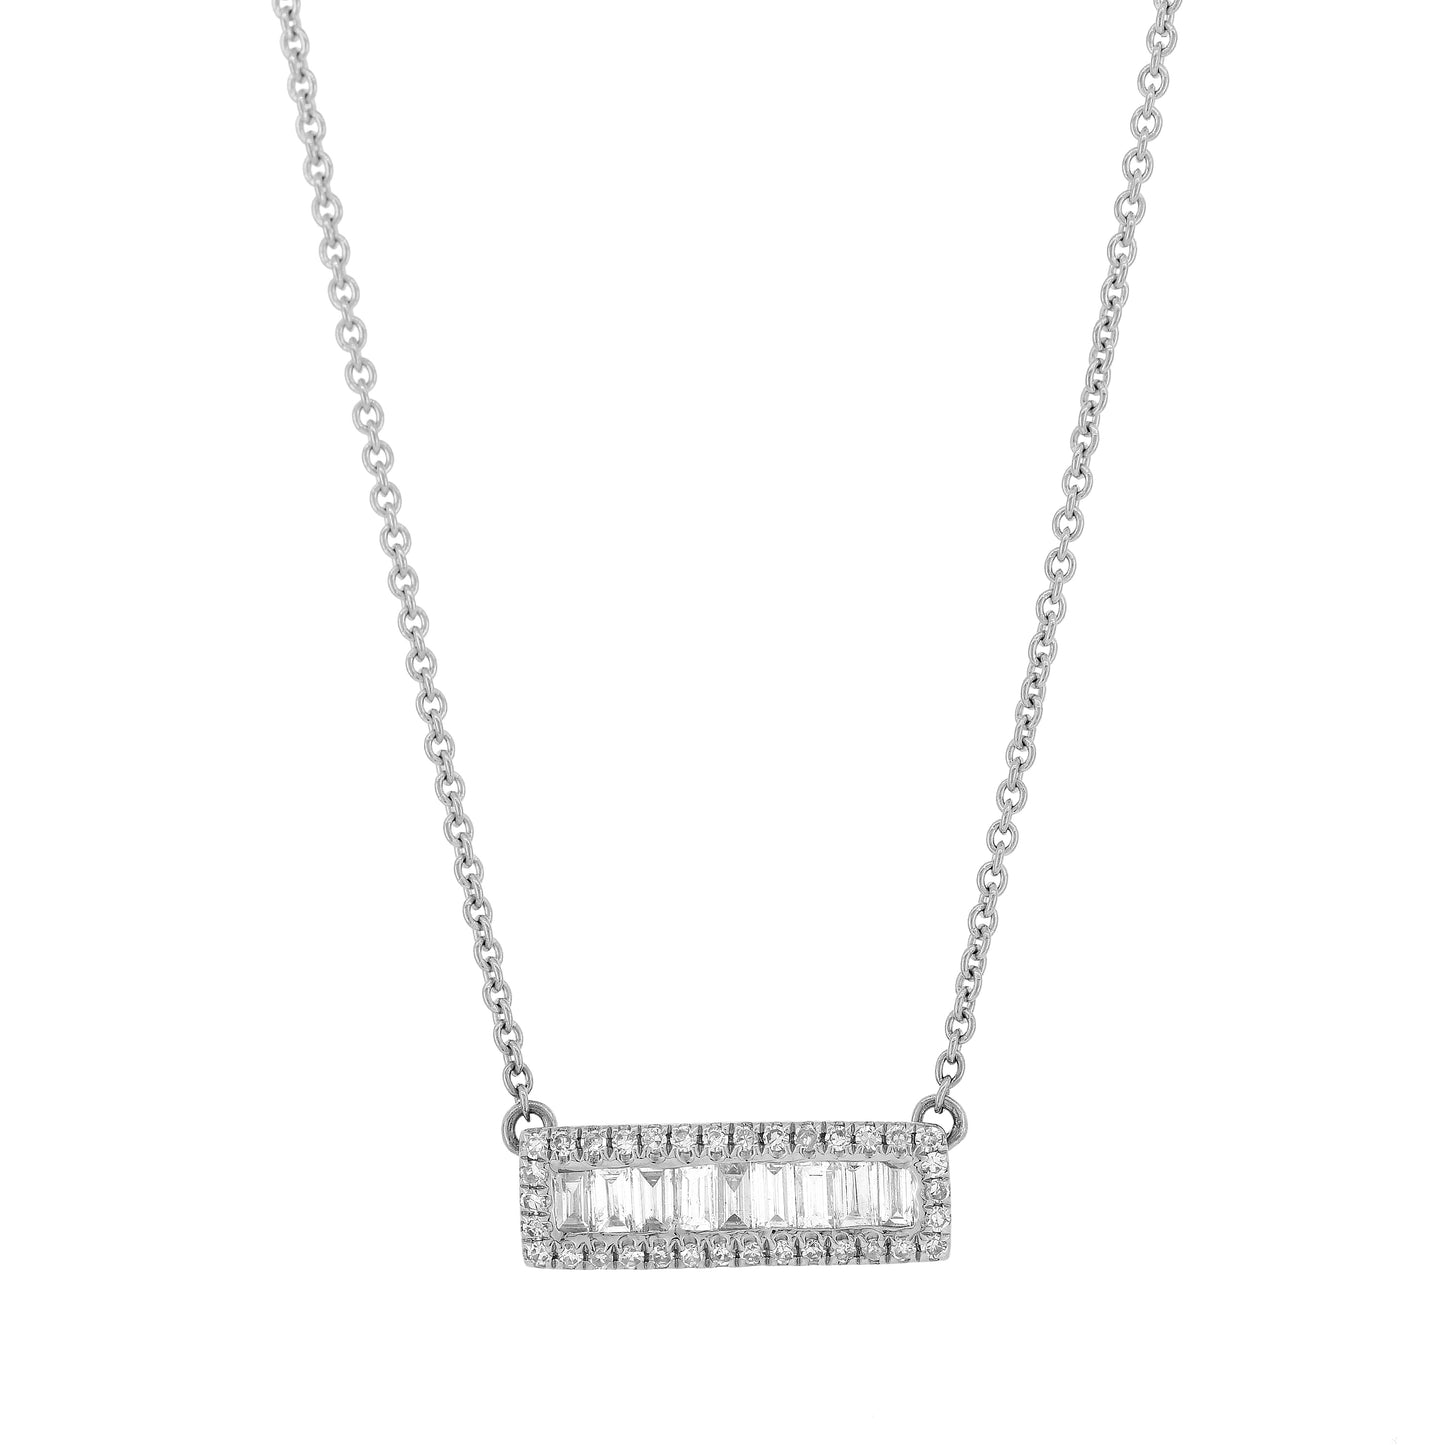 The 14K White Gold Delancey Necklace with Diamond Bar Pendant